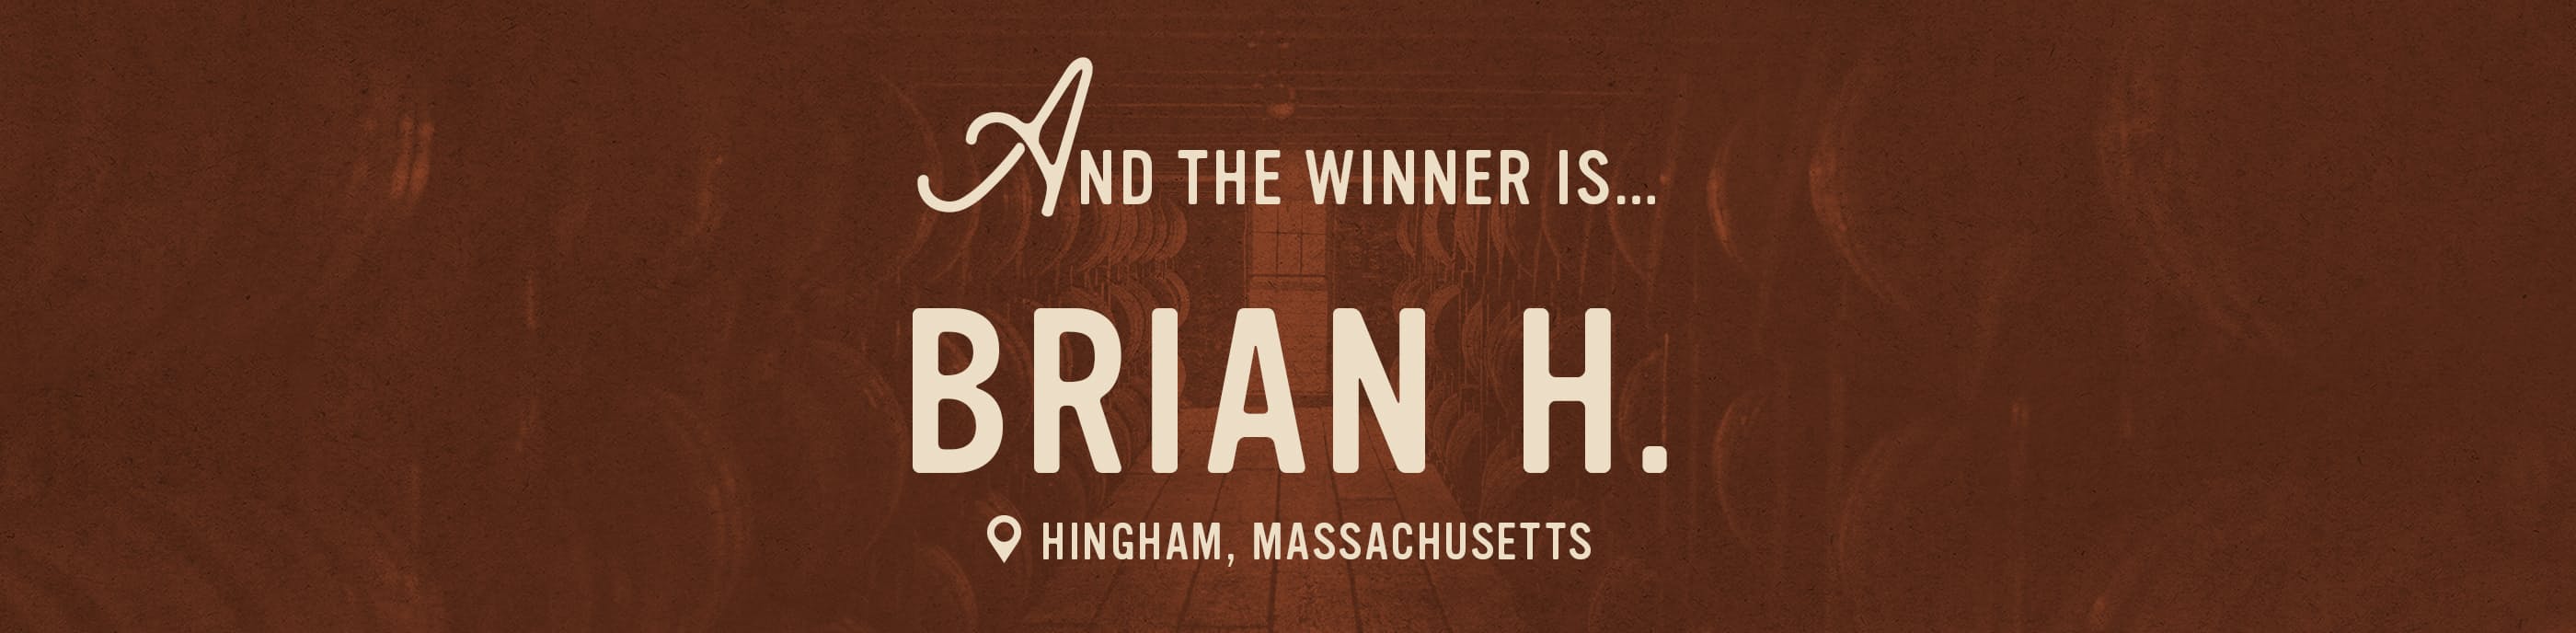 And the winner is: Brian H. from Hingham, Massachusetts